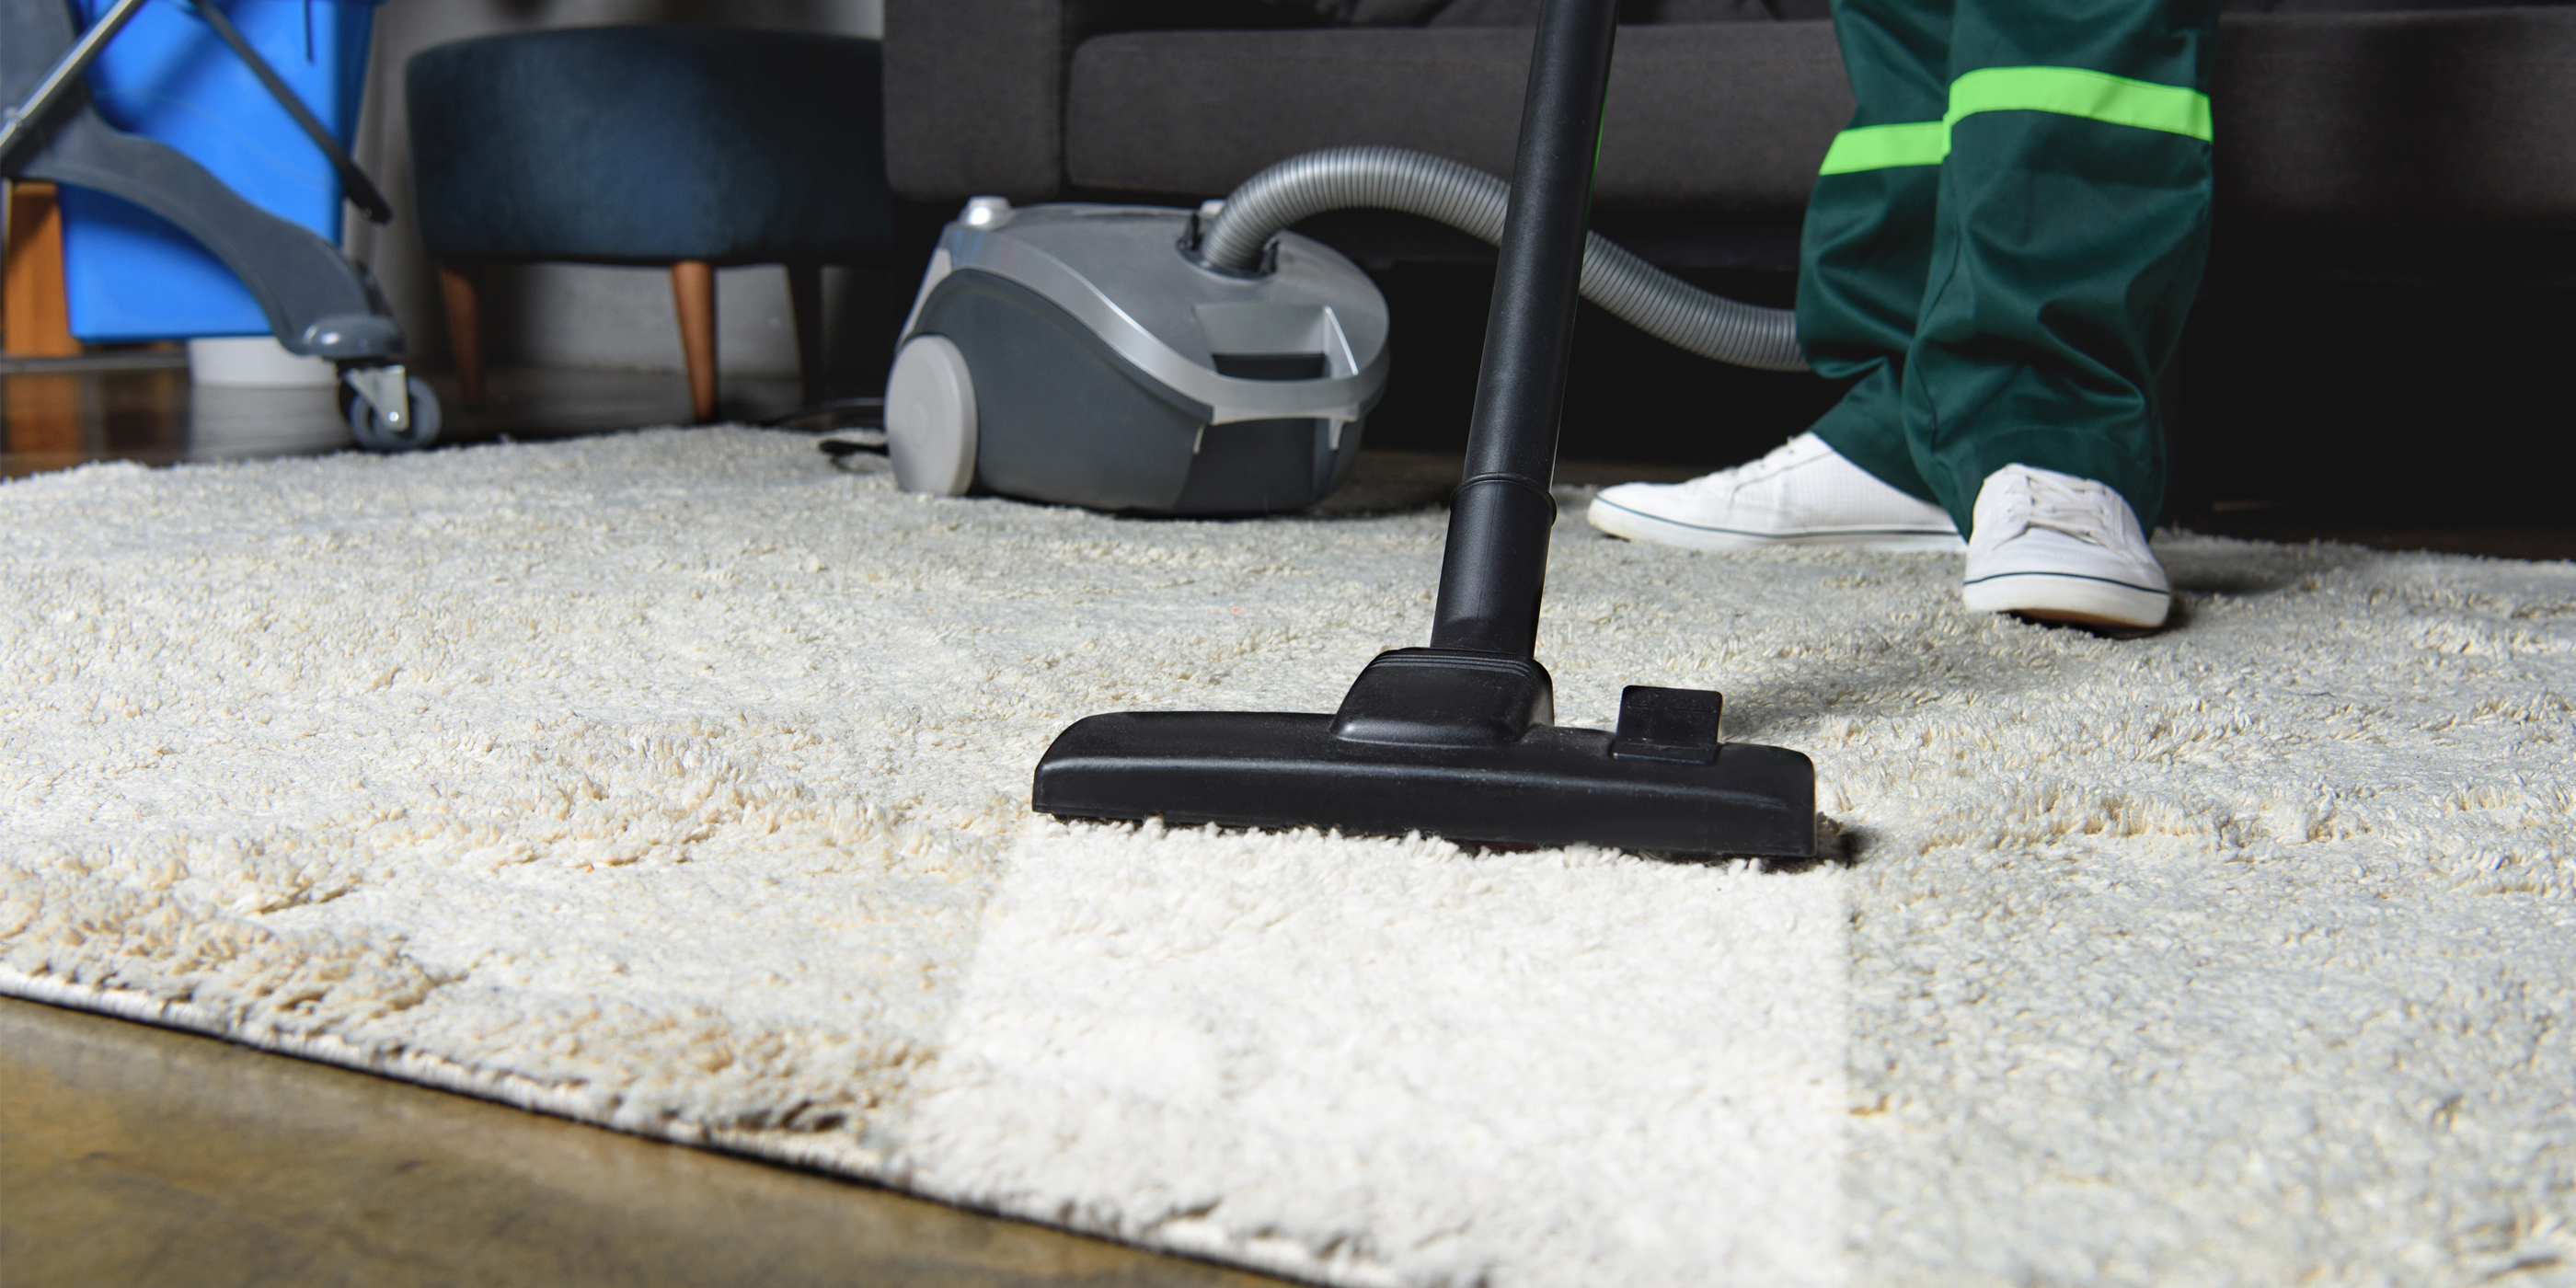 Carpet Cleaning Social Media Marketing Tips to Acquire More Customers